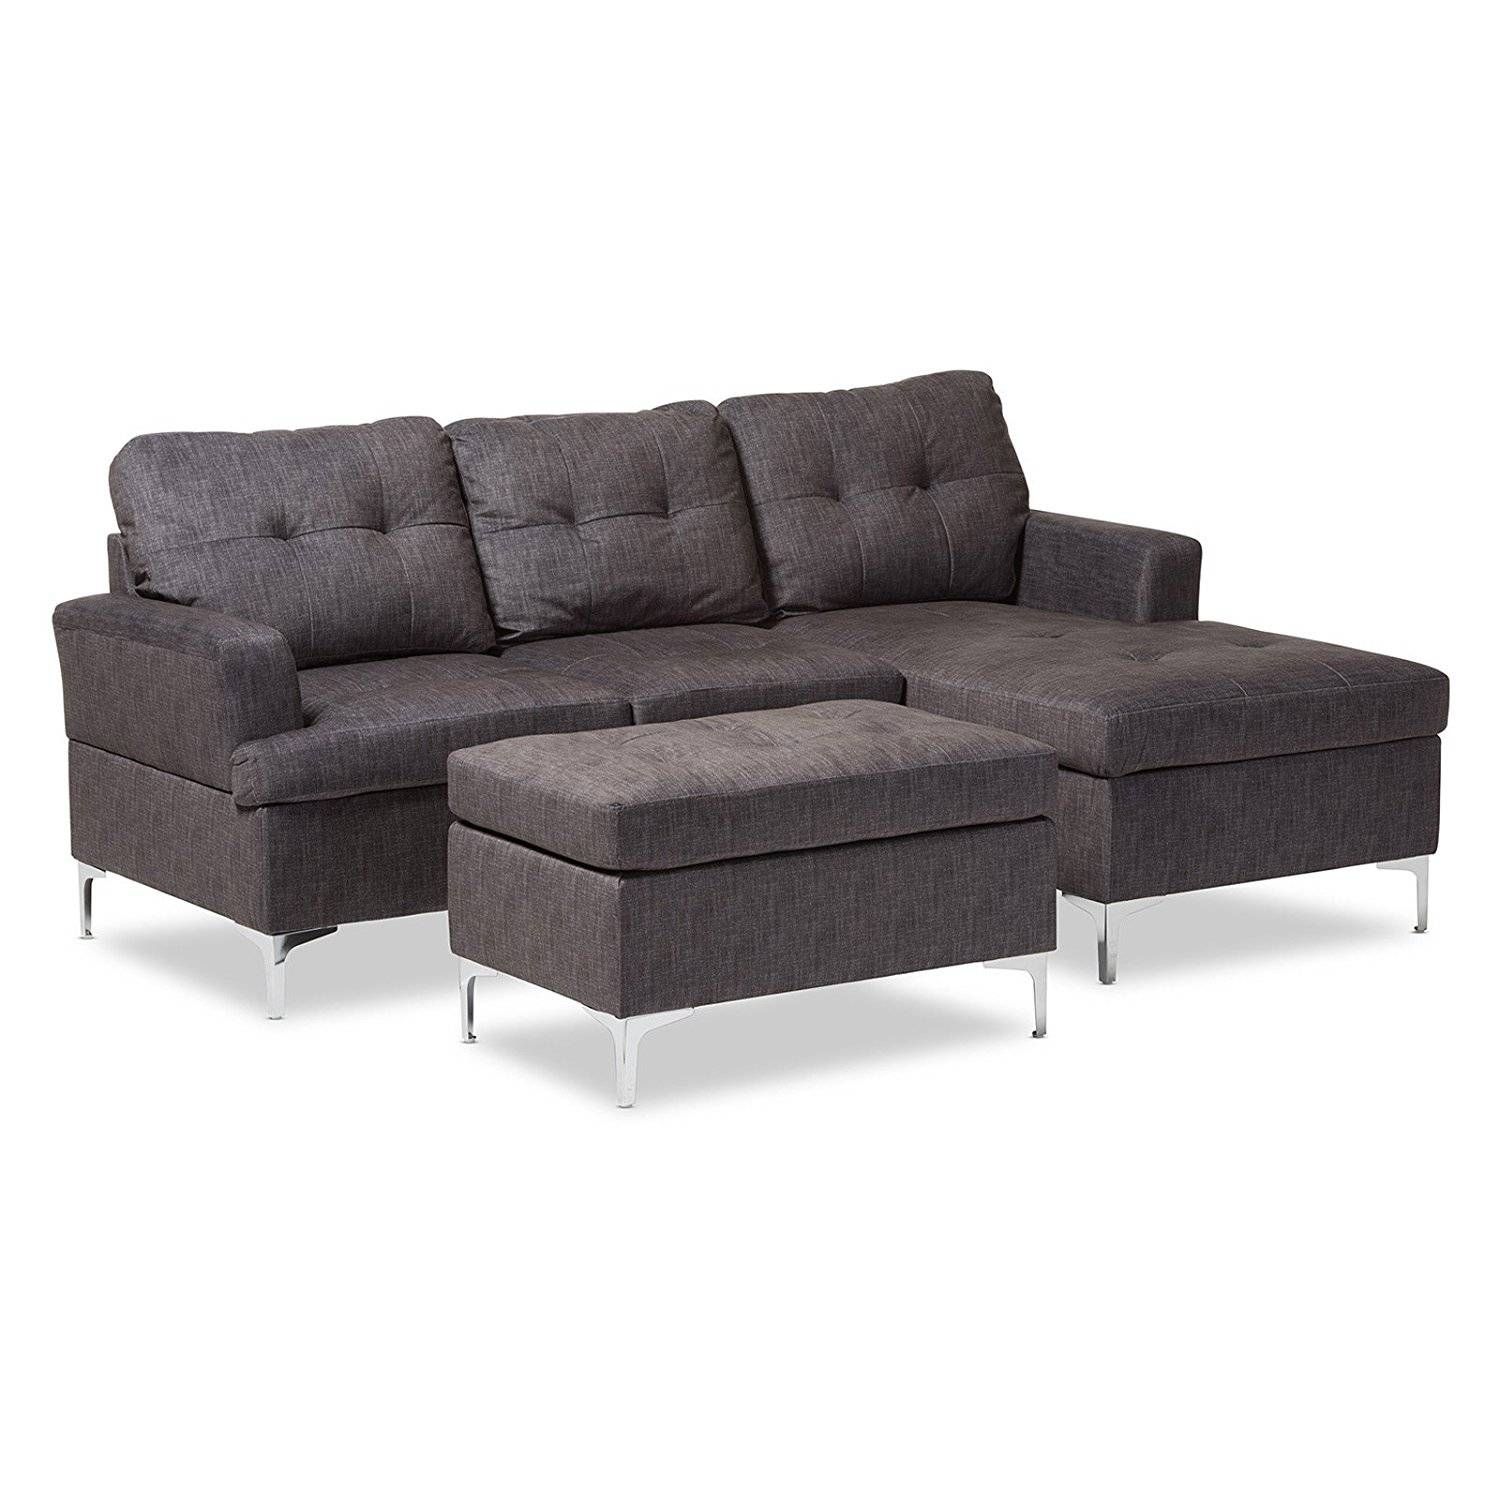 Furniture: Elegant Baxton Studio Sectional For Mid Century Modern With Regard To Braxton Sectional Sofa (View 27 of 30)